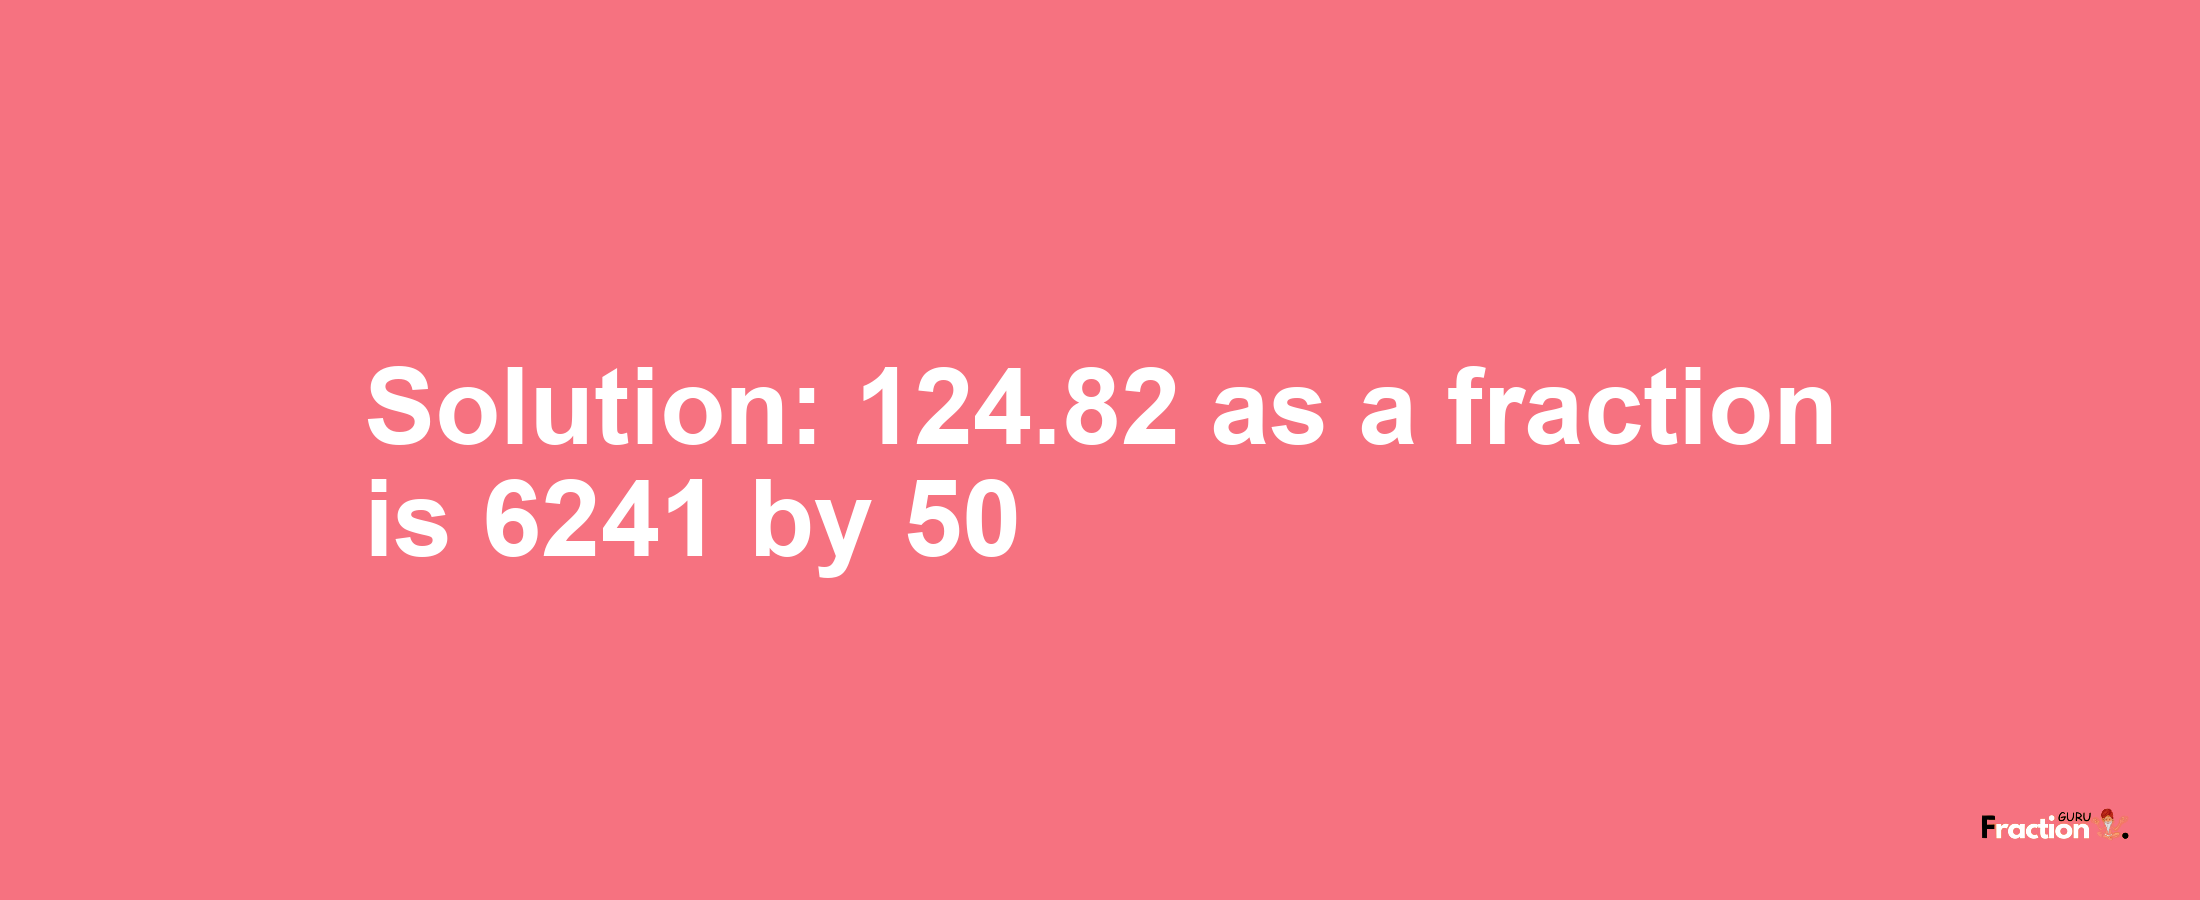 Solution:124.82 as a fraction is 6241/50